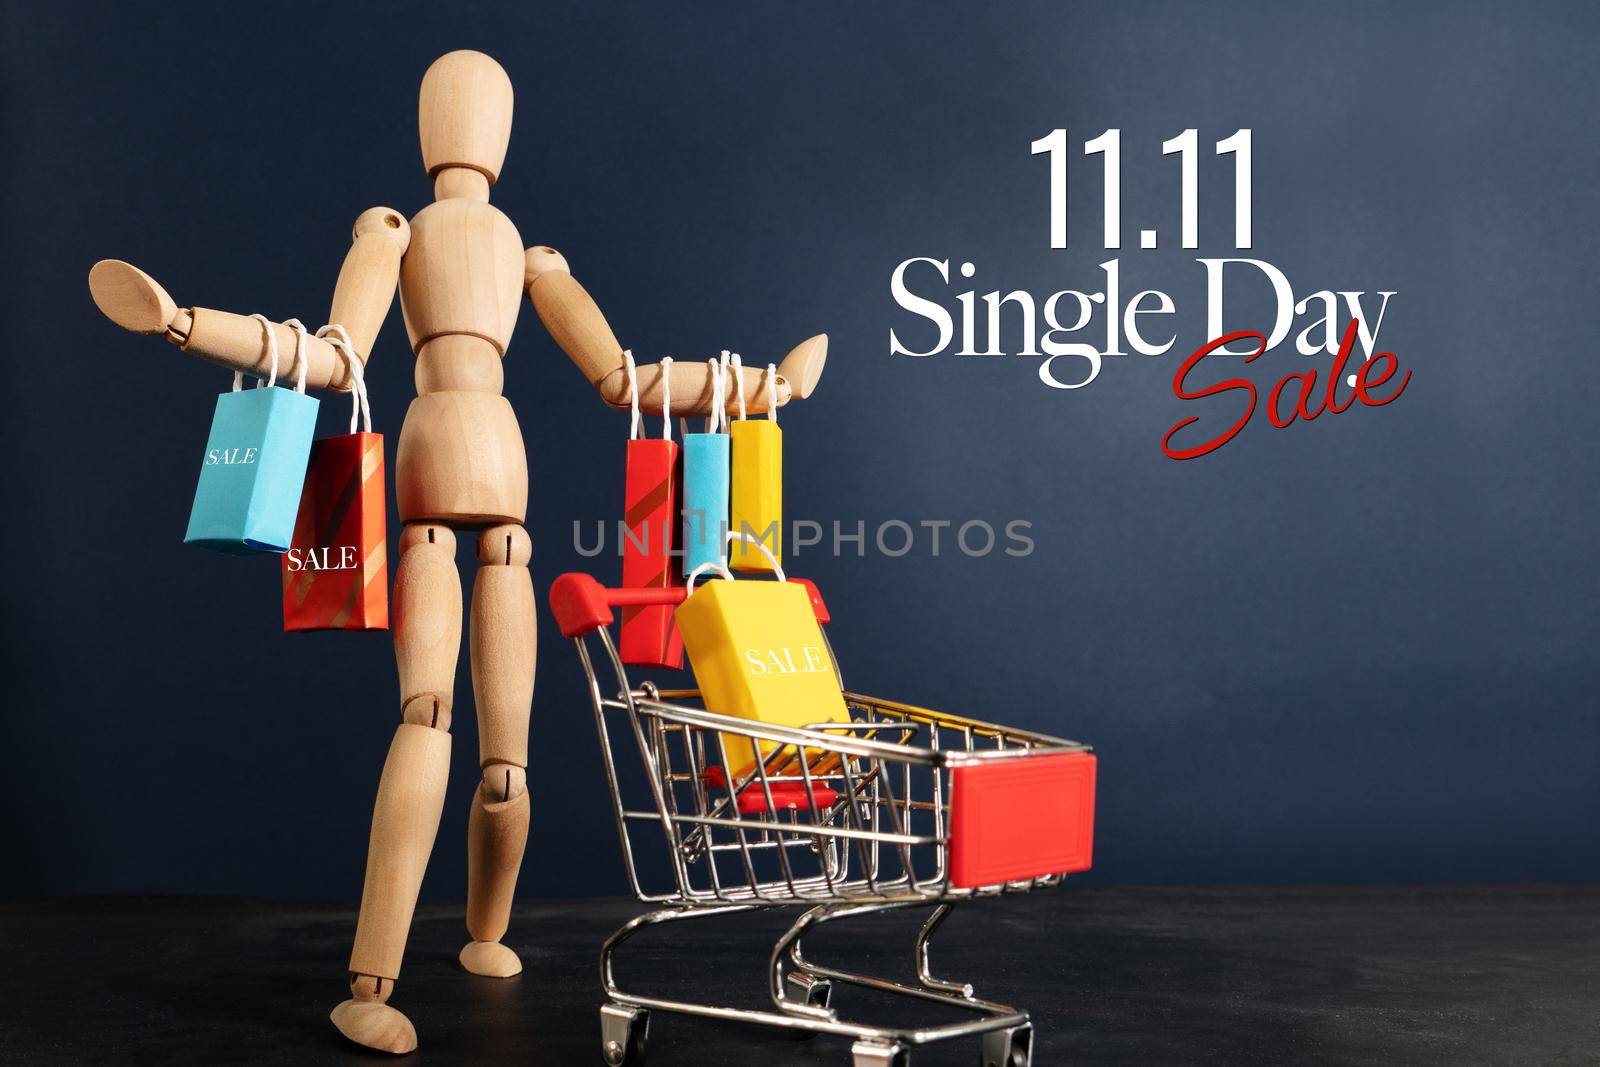 11.11 singles day sale concept, shopaholic wooden doll with lots of shopping bags on arm and shopping cart by psodaz